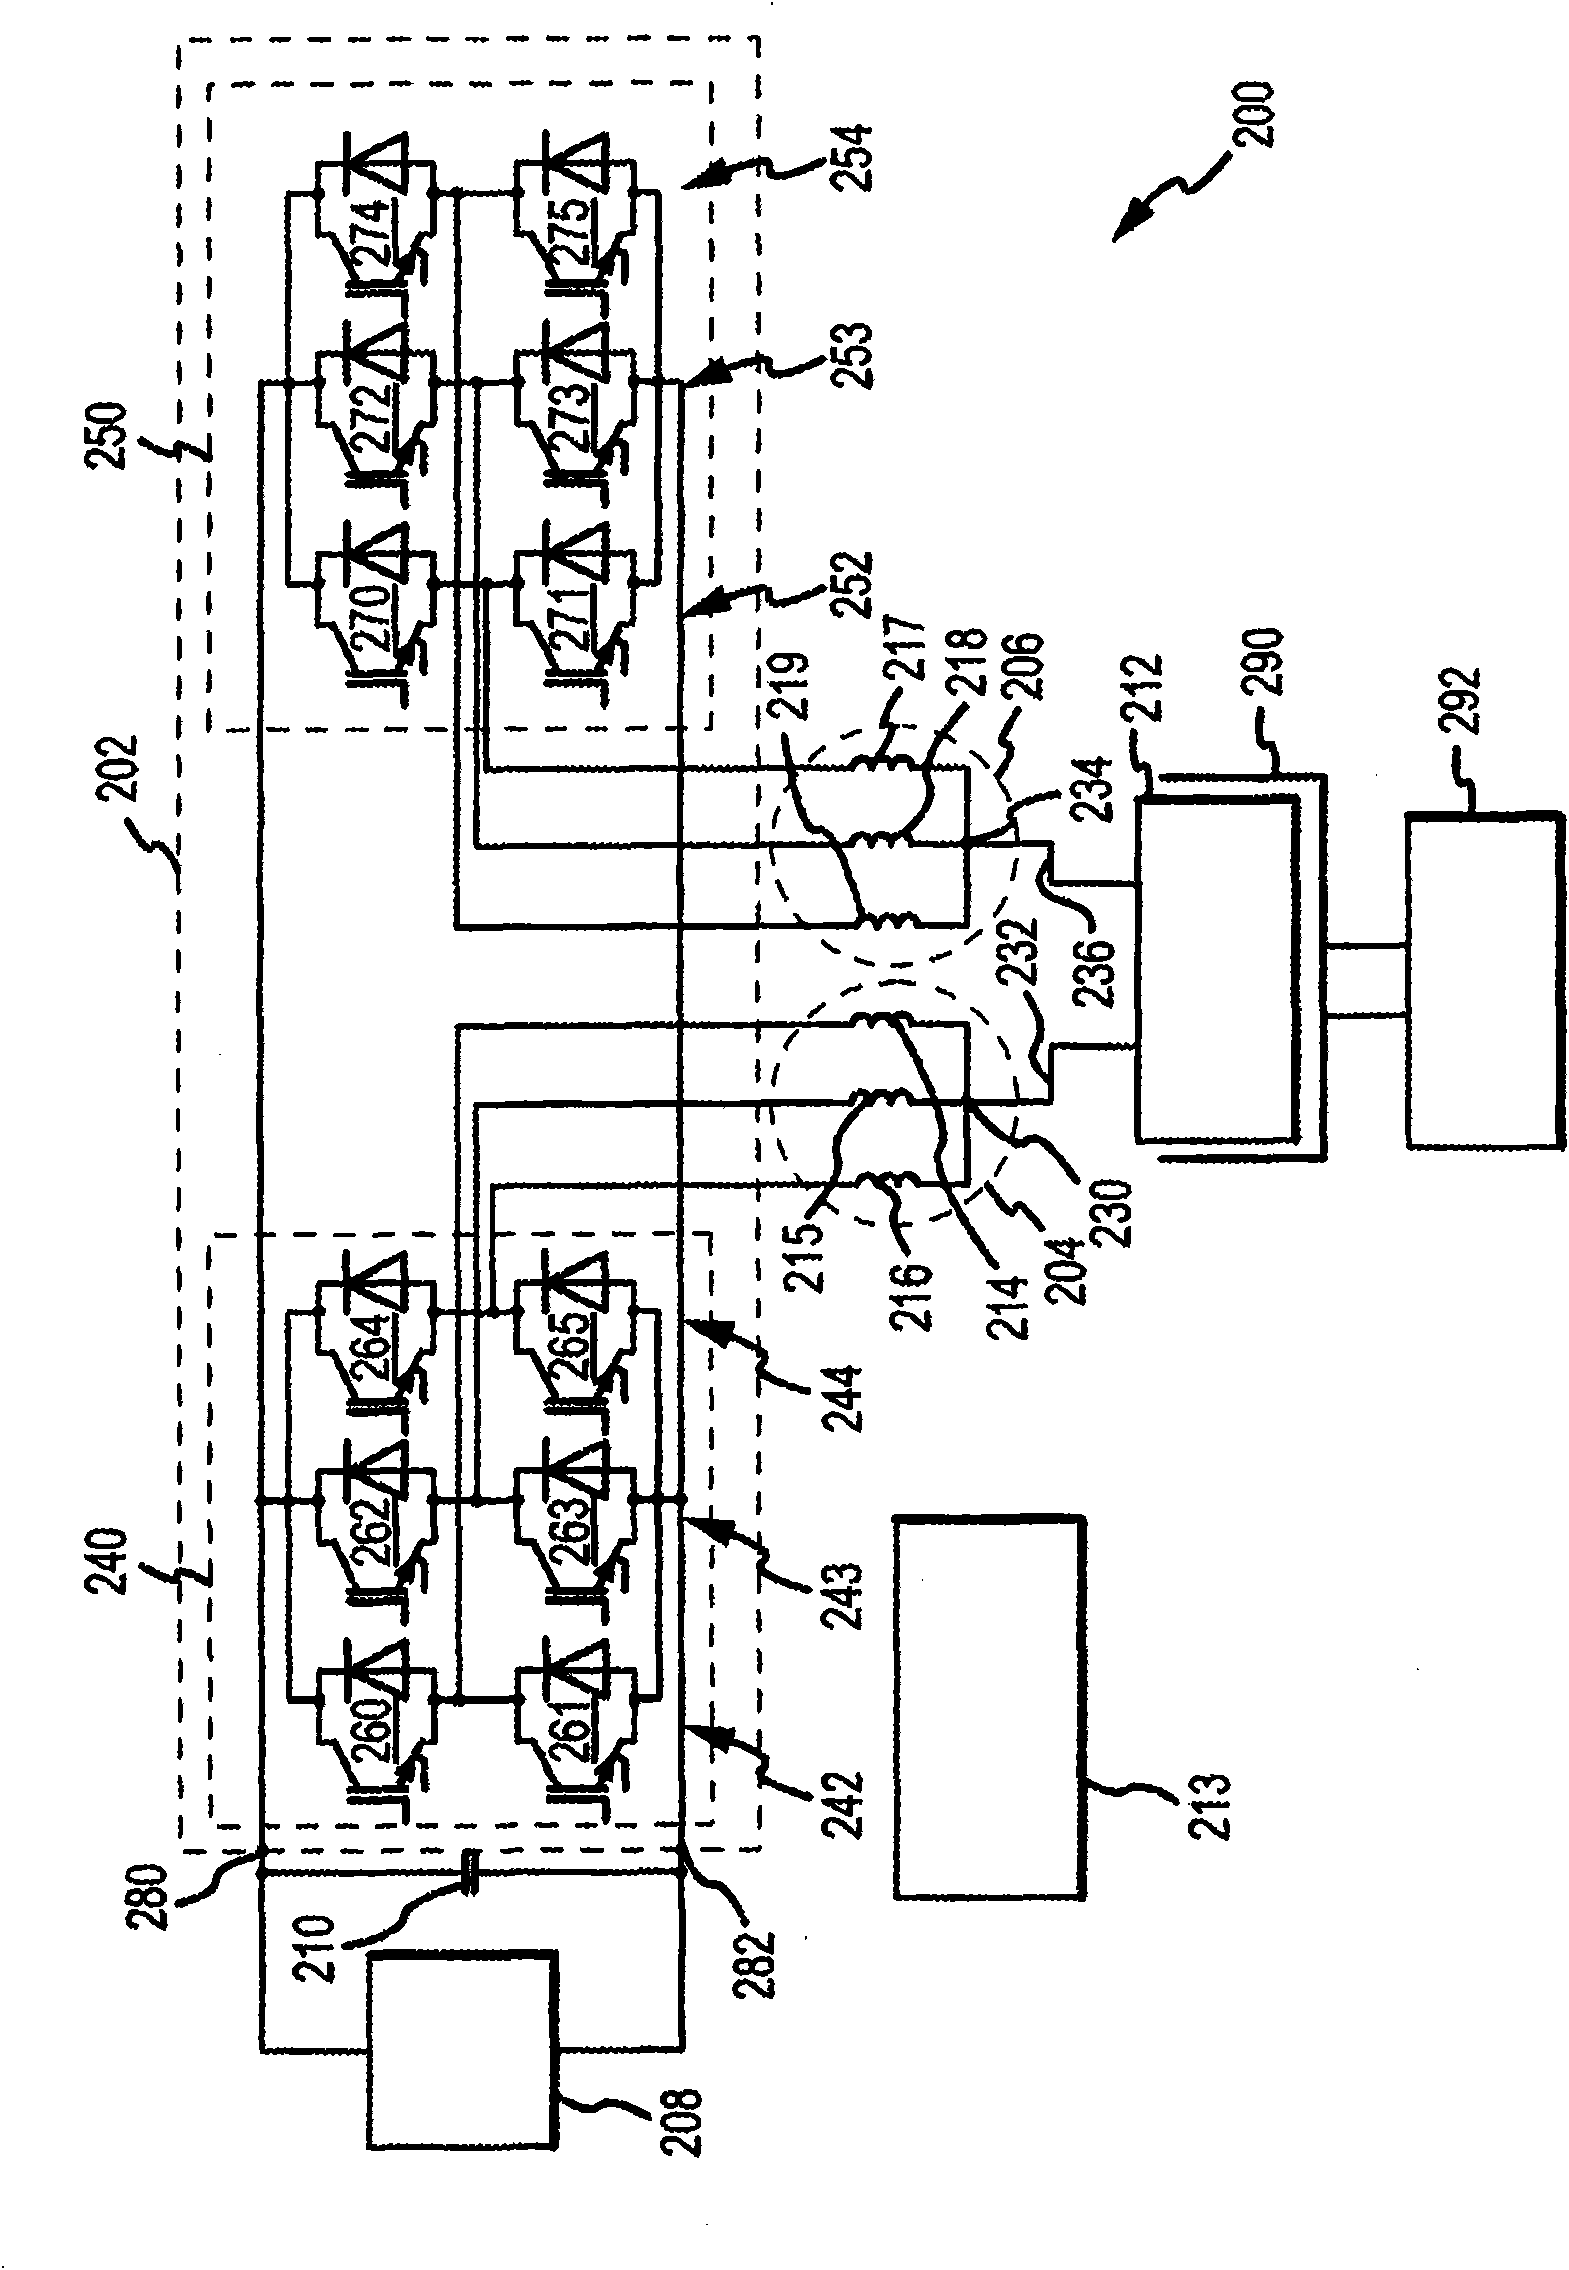 Power processing systems and methods for use in plug-in electric vehicles